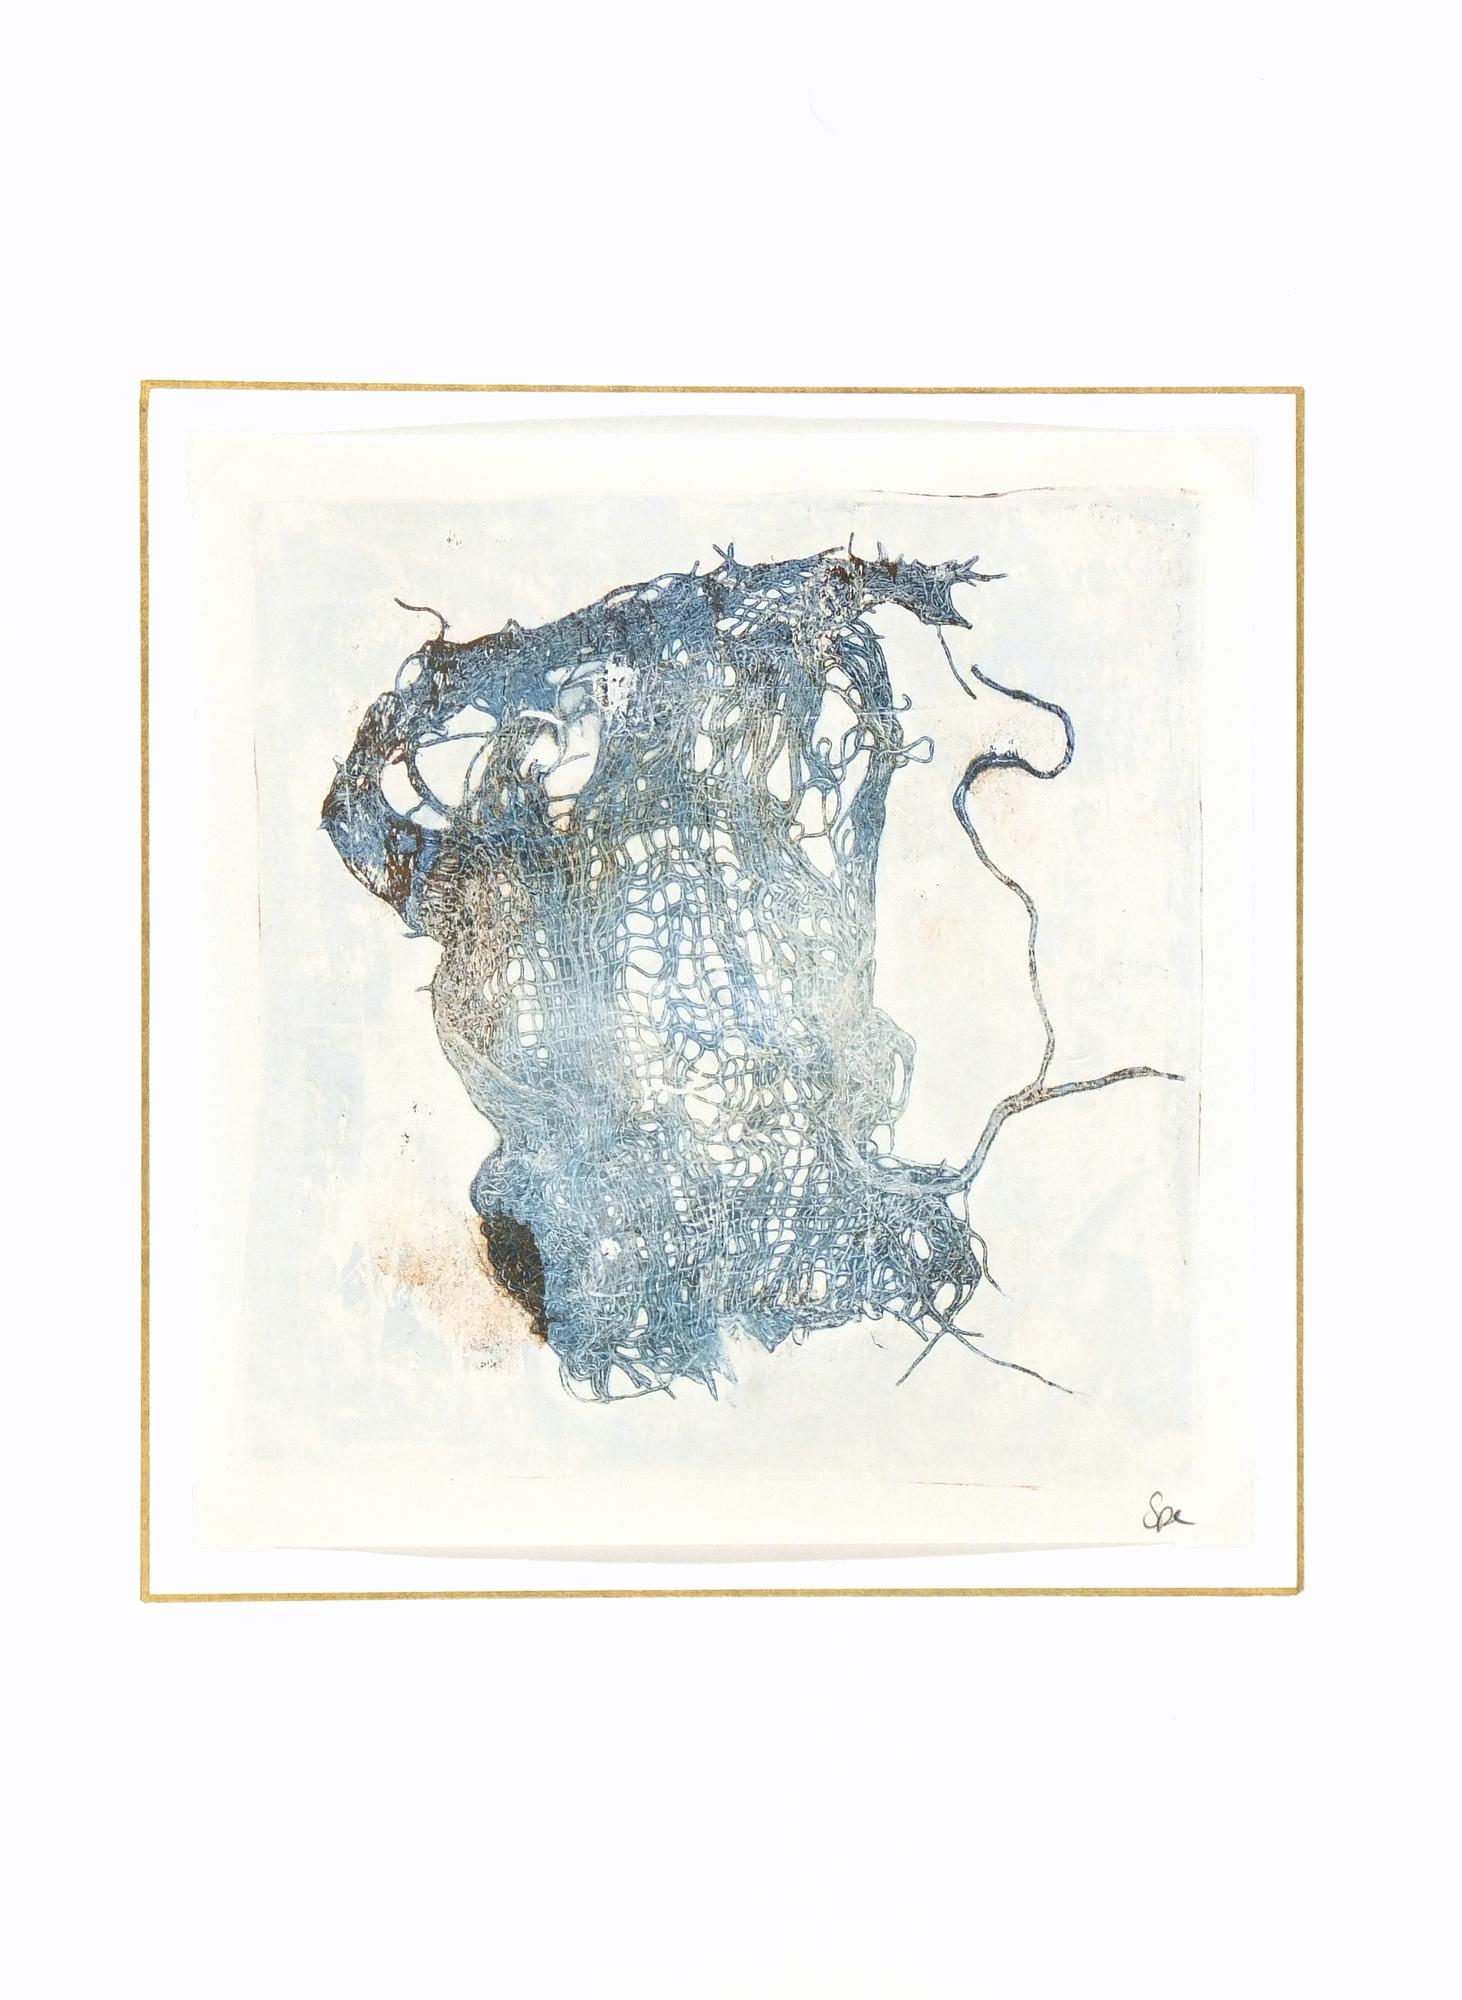 Bold acrylic abstract painting in blue with shades of gold/tan by British artist Spe, 2013. Signed lower right.

Original artwork on paper displayed on a white mat with a gold border. Mat fits a standard-size frame.  Archival plastic sleeve and